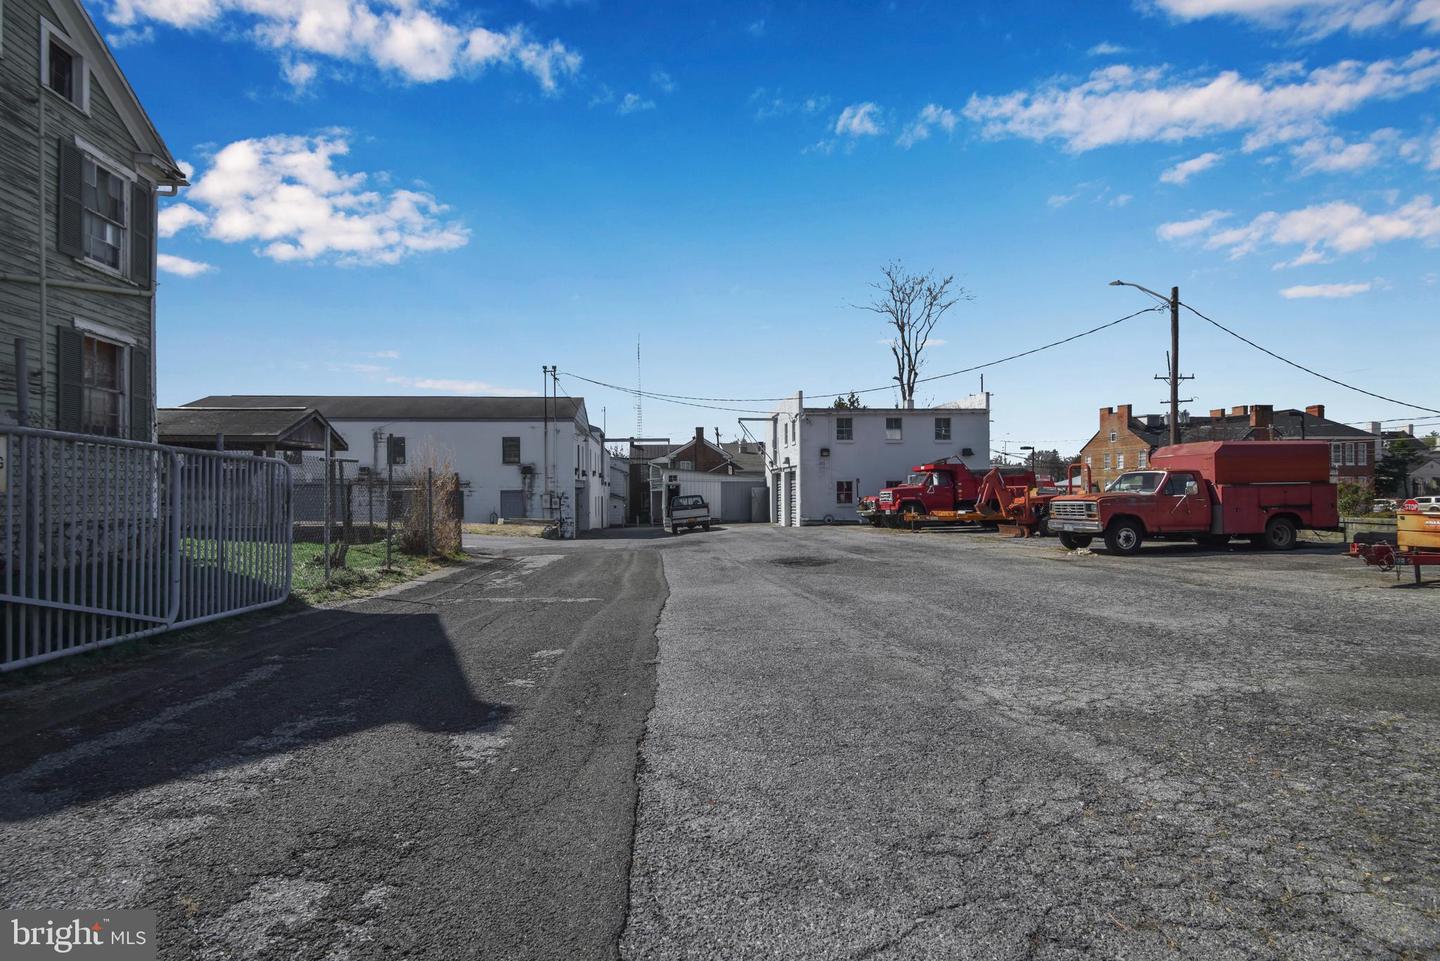 28 MAIN #30 MAIN 15 ACADEMY, BERRYVILLE, Virginia 22611, ,Land,For sale,28 MAIN #30 MAIN 15 ACADEMY,VACL2001674 MLS # VACL2001674